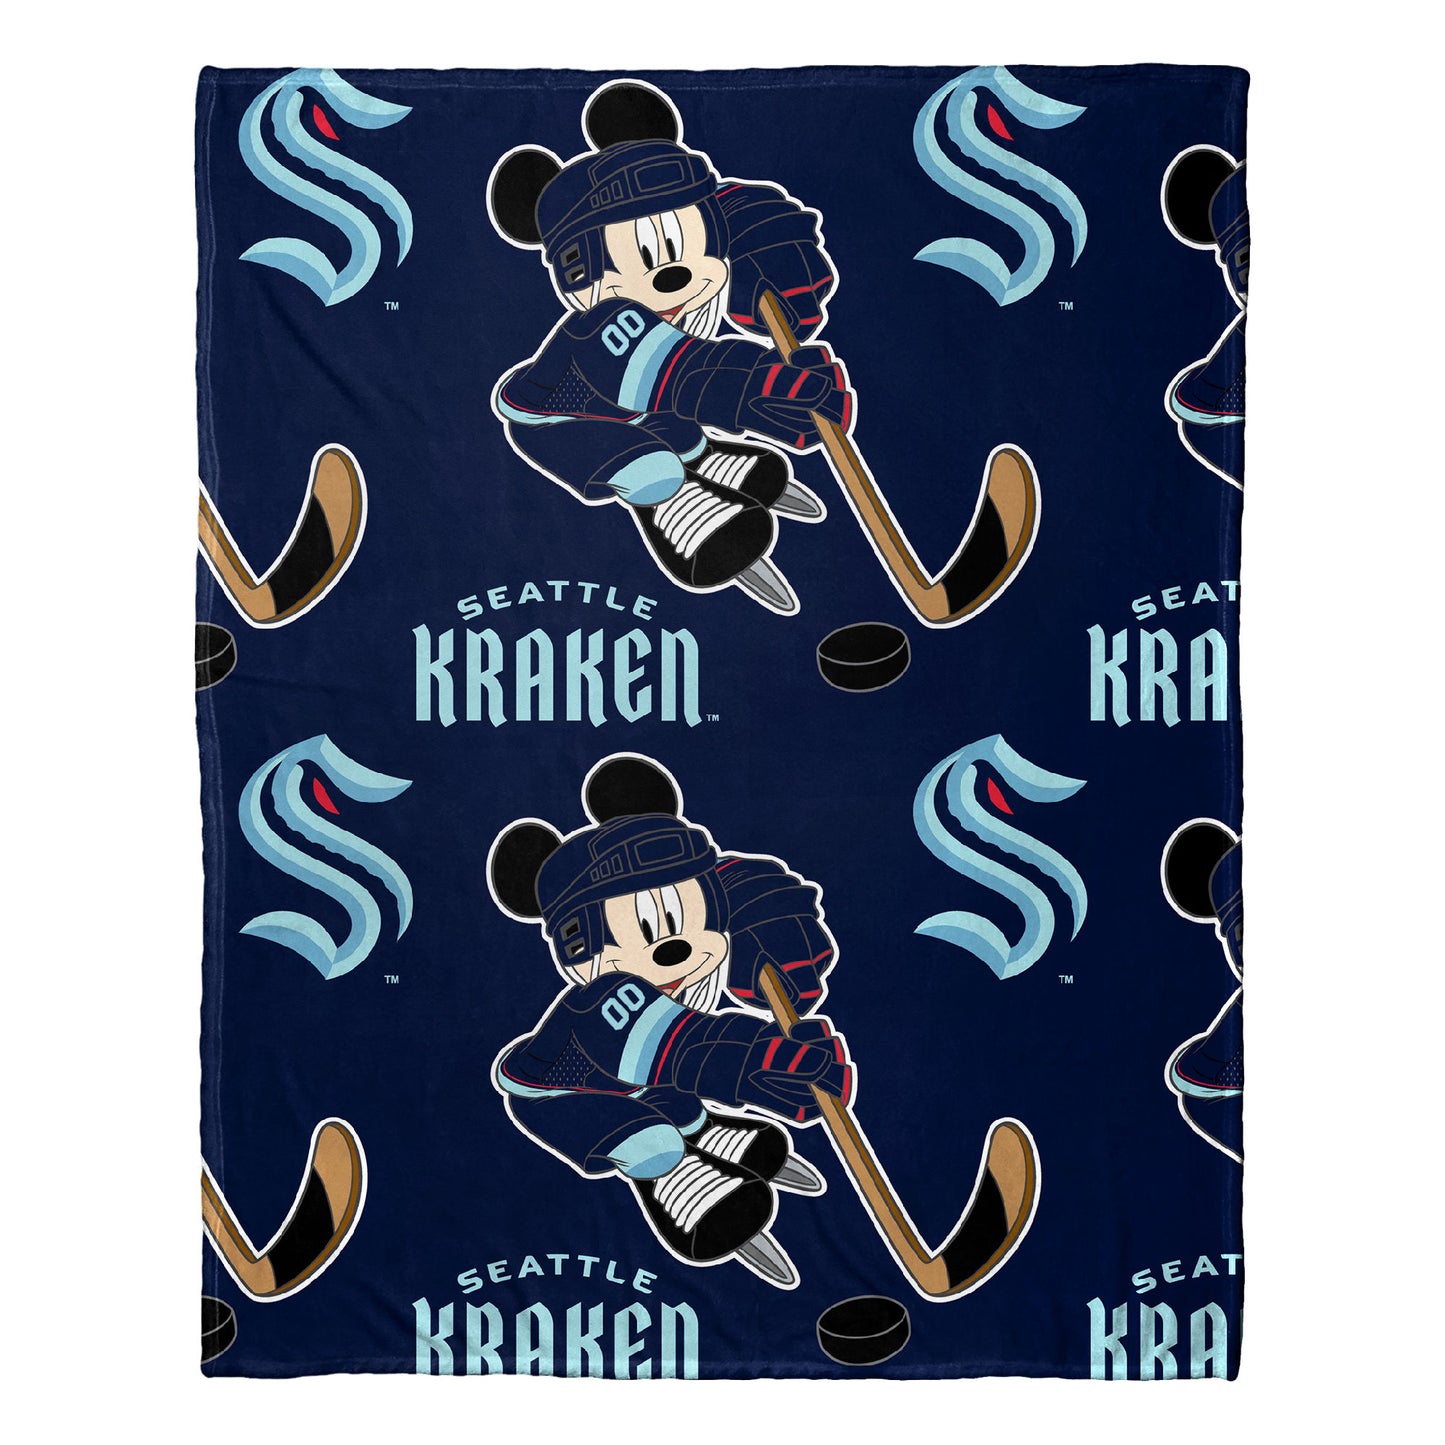 Krakens OFFICIAL NHL & Disney's Mickey Mouse Character Hugger Pillow & Silk Touch Throw Set;  40" x 50"